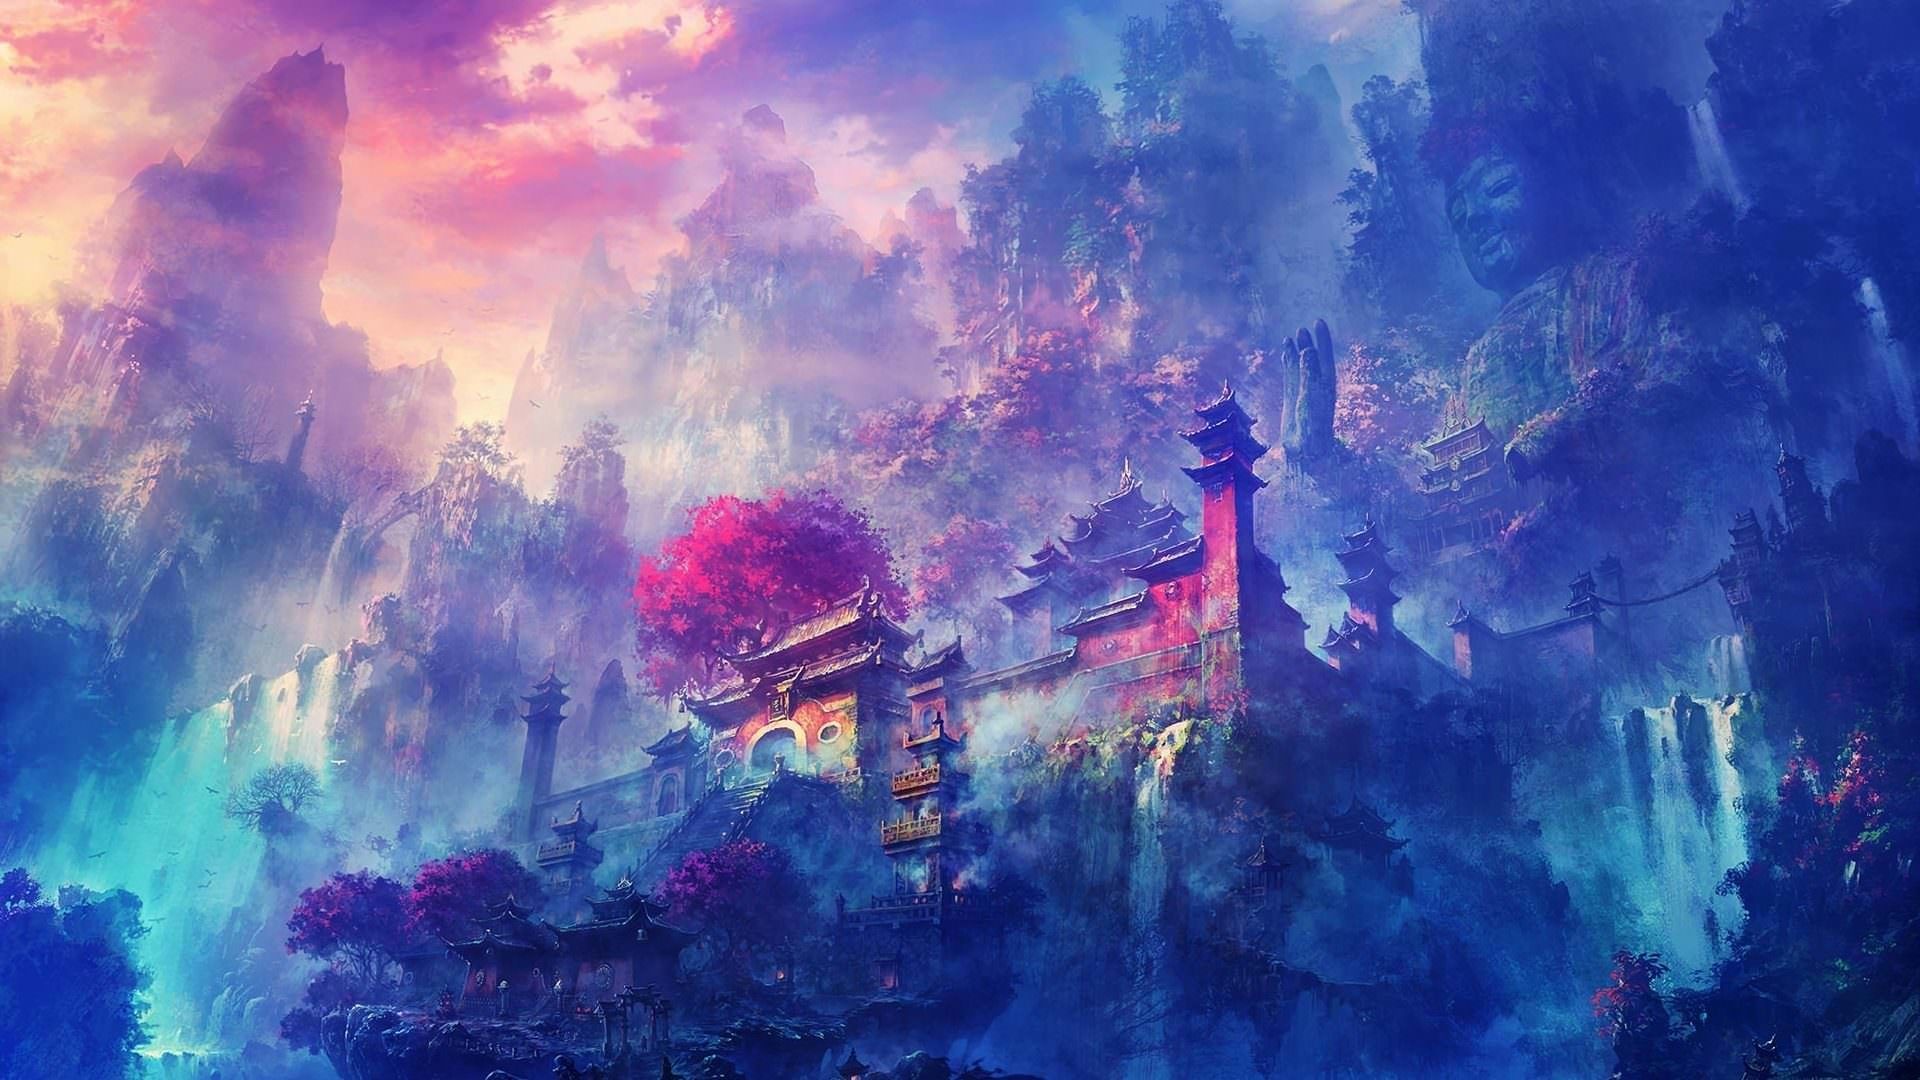 Anime Scenery Wallpaper (best Anime Scenery Wallpaper and image) on WallpaperChat